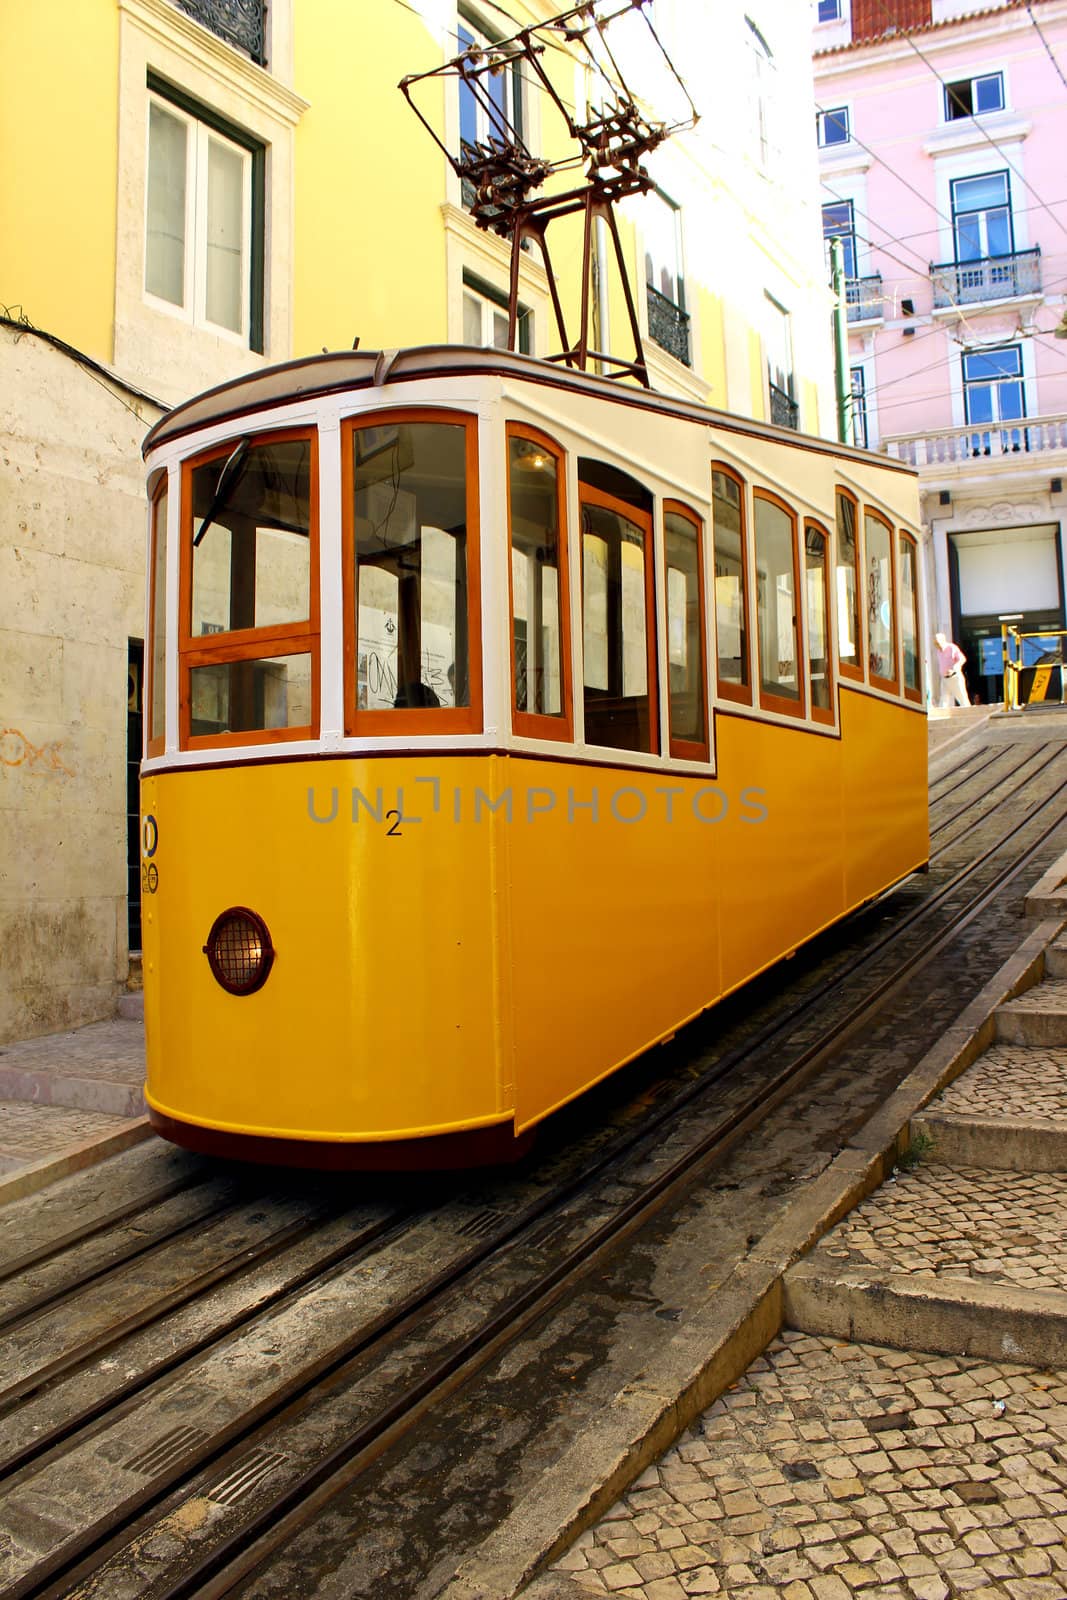 This funicular is one of the three that still work everyday in Lisbon.